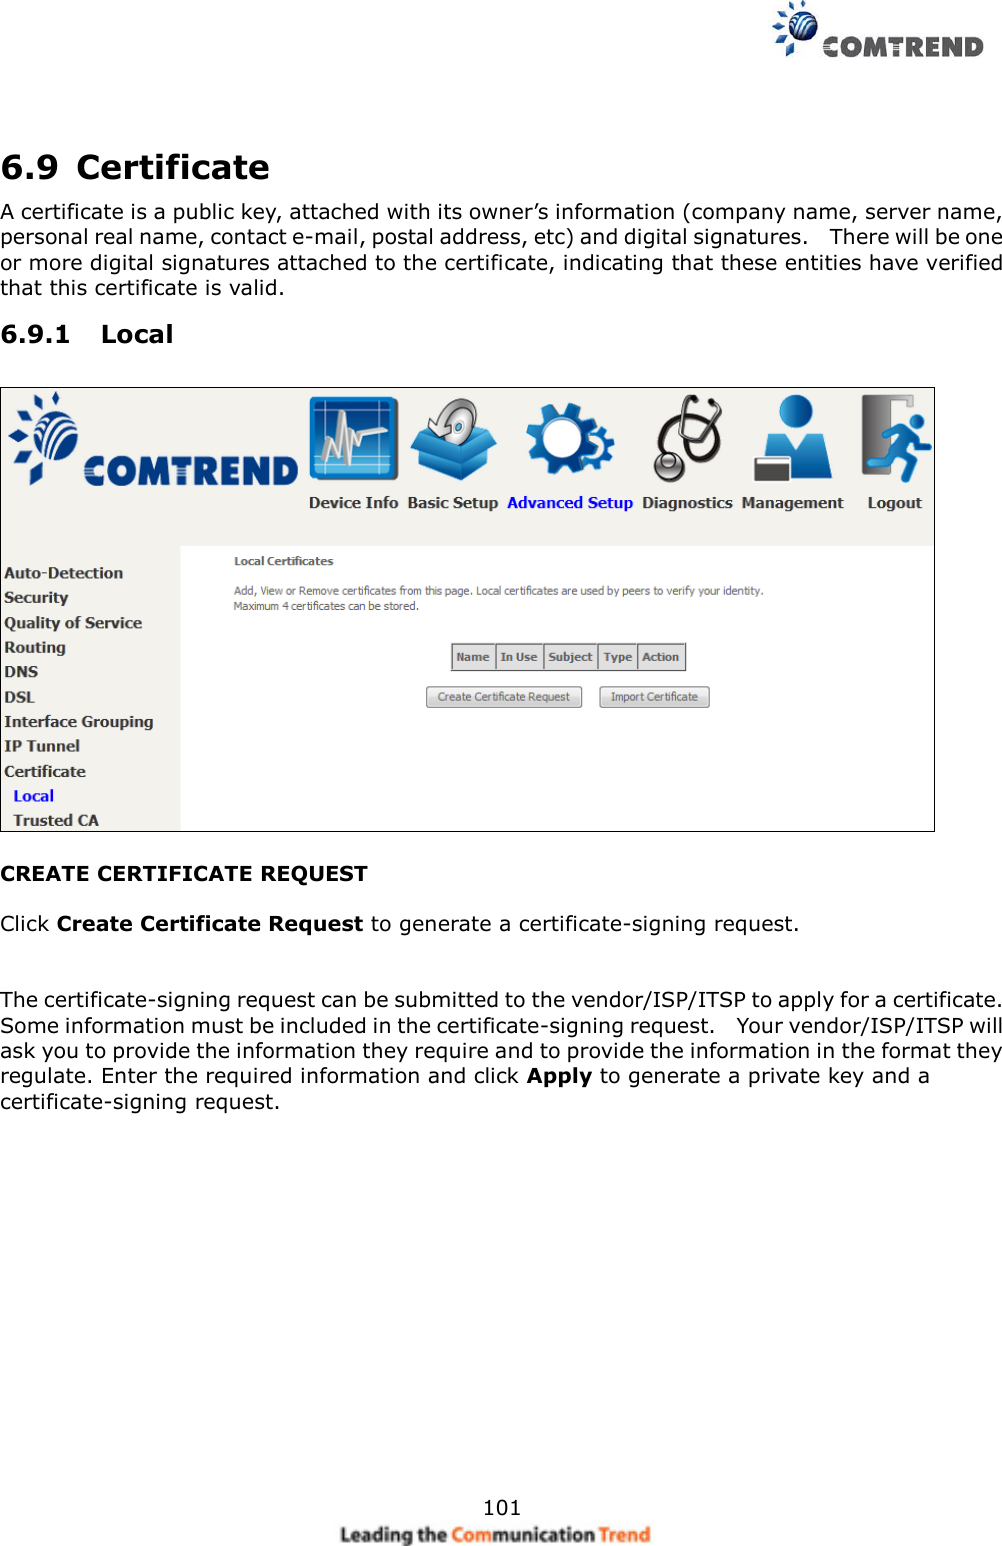     101   6.9  Certificate A certificate is a public key, attached with its owner’s information (company name, server name, personal real name, contact e-mail, postal address, etc) and digital signatures.    There will be one or more digital signatures attached to the certificate, indicating that these entities have verified that this certificate is valid. 6.9.1  Local  CREATE CERTIFICATE REQUEST  Click Create Certificate Request to generate a certificate-signing request.     The certificate-signing request can be submitted to the vendor/ISP/ITSP to apply for a certificate.   Some information must be included in the certificate-signing request.    Your vendor/ISP/ITSP will ask you to provide the information they require and to provide the information in the format they regulate. Enter the required information and click Apply to generate a private key and a certificate-signing request.      